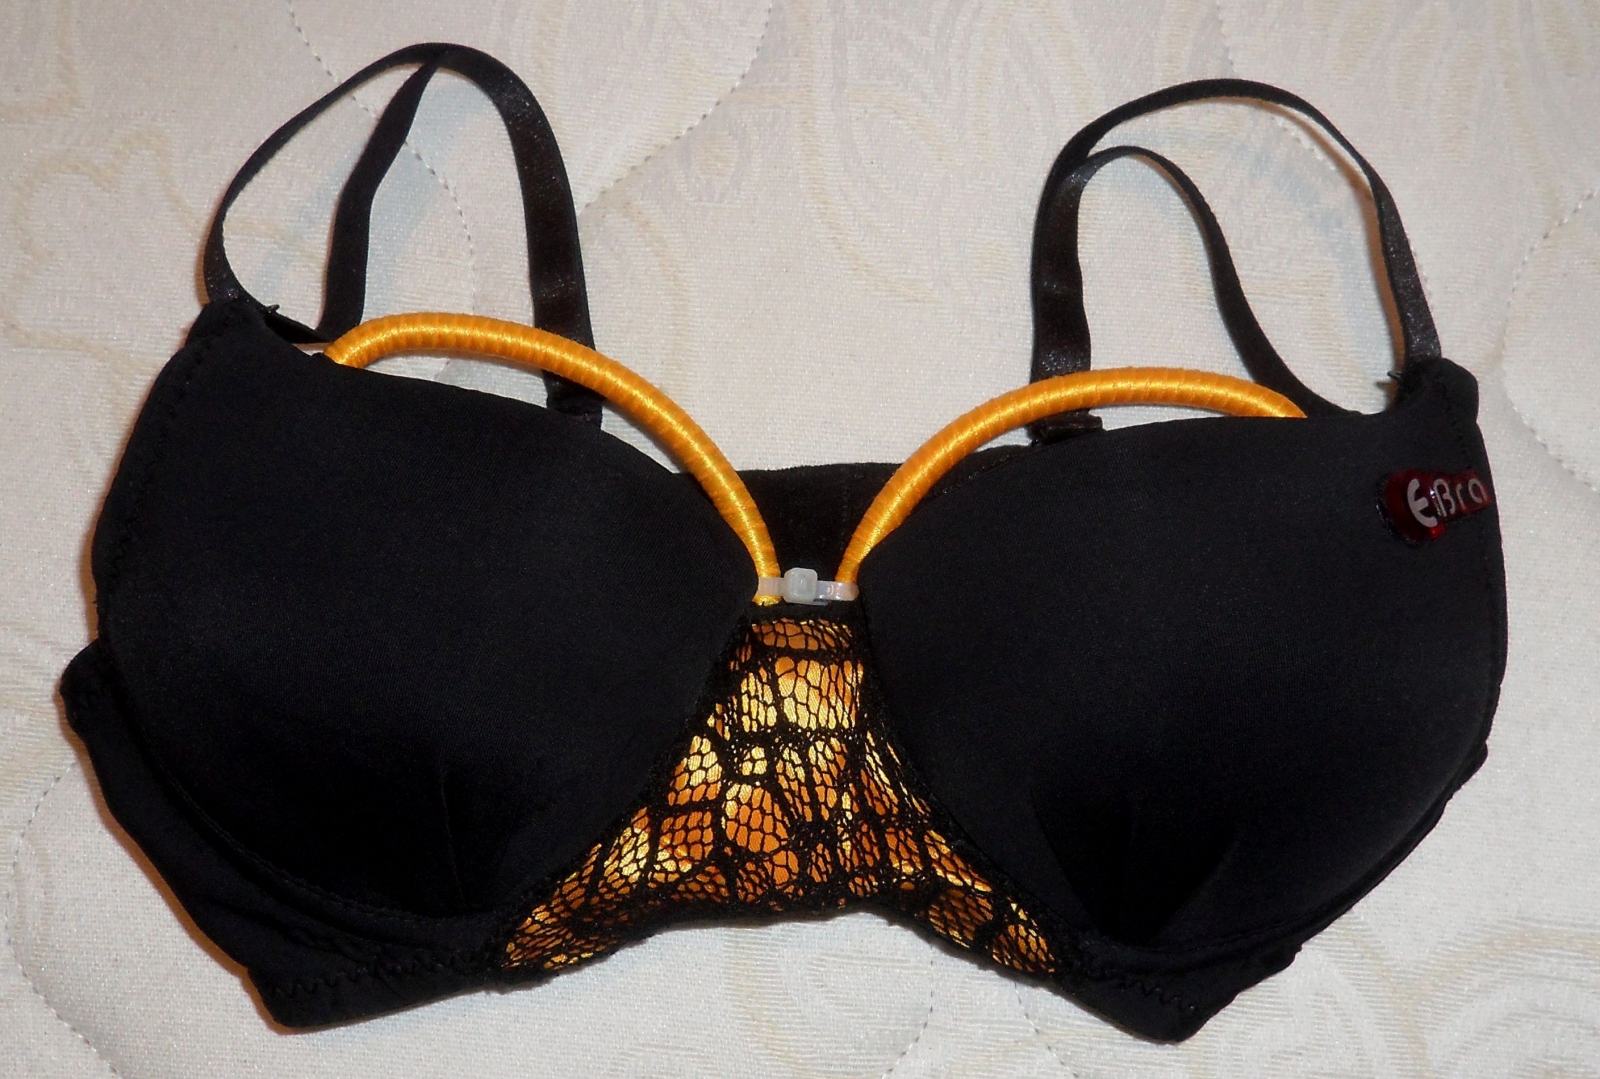 This vibrating bra claims to magically increase breast sizes